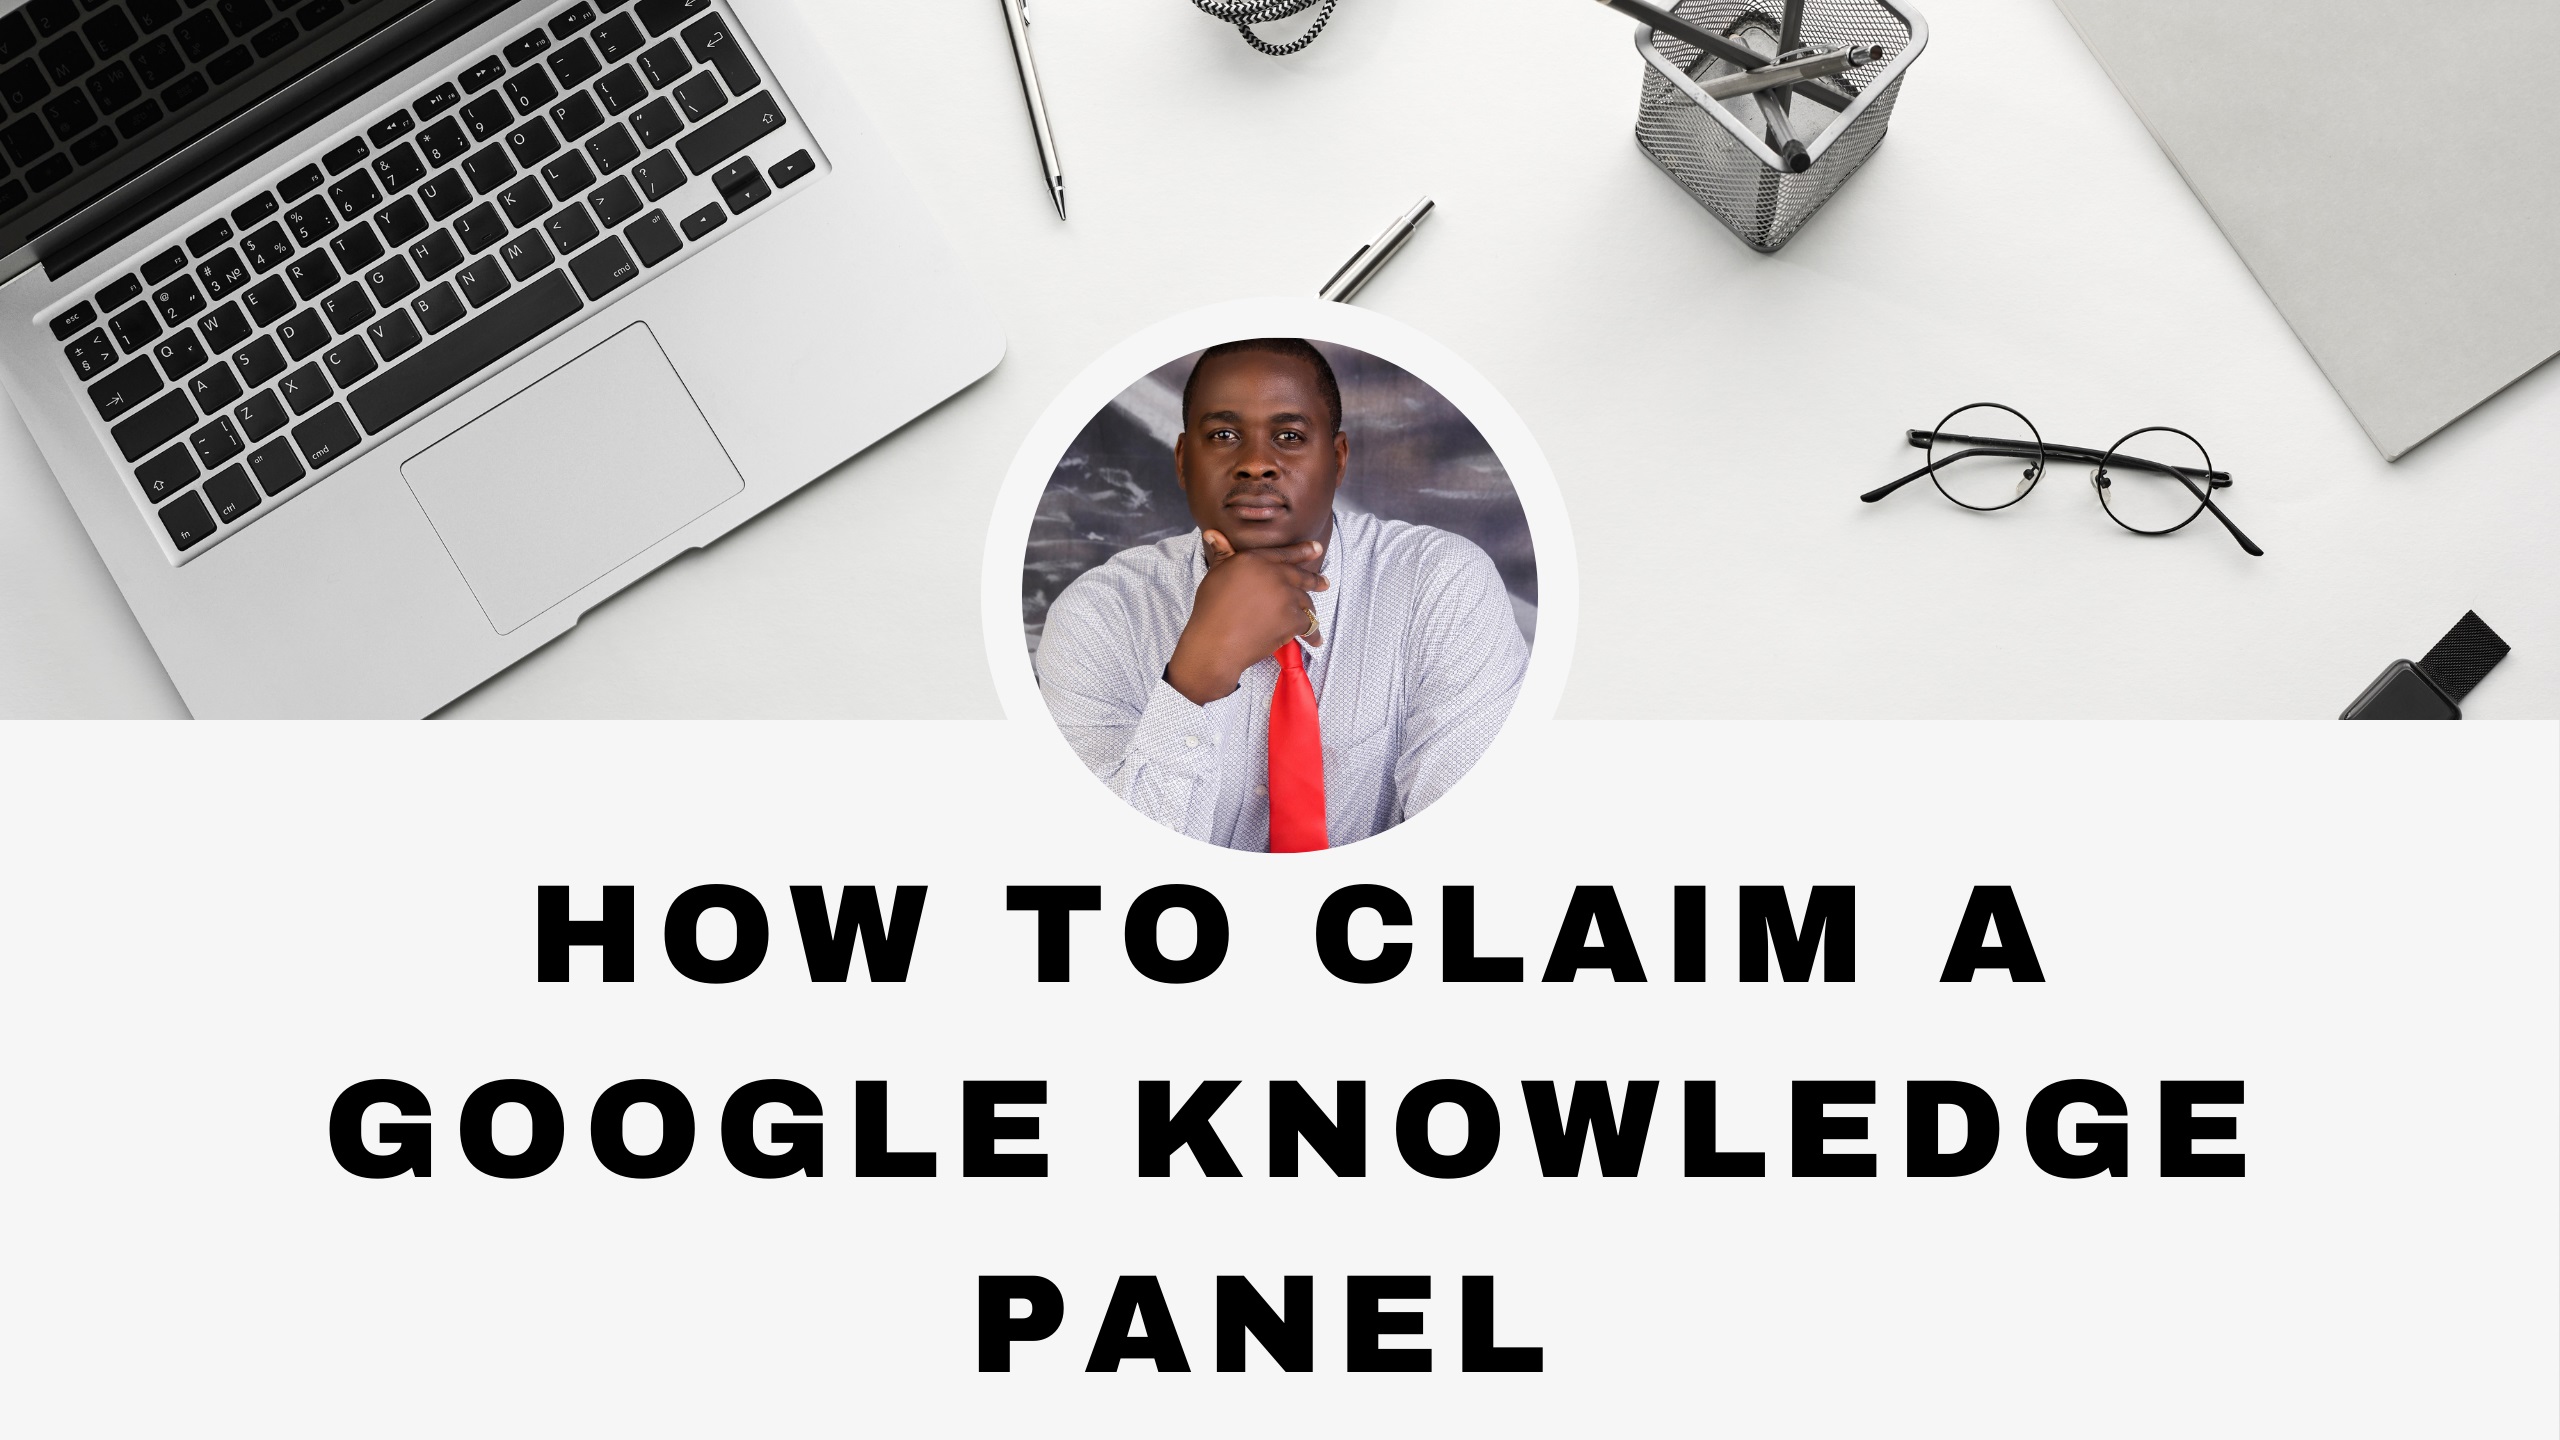 How to claim a Google knowledge panel